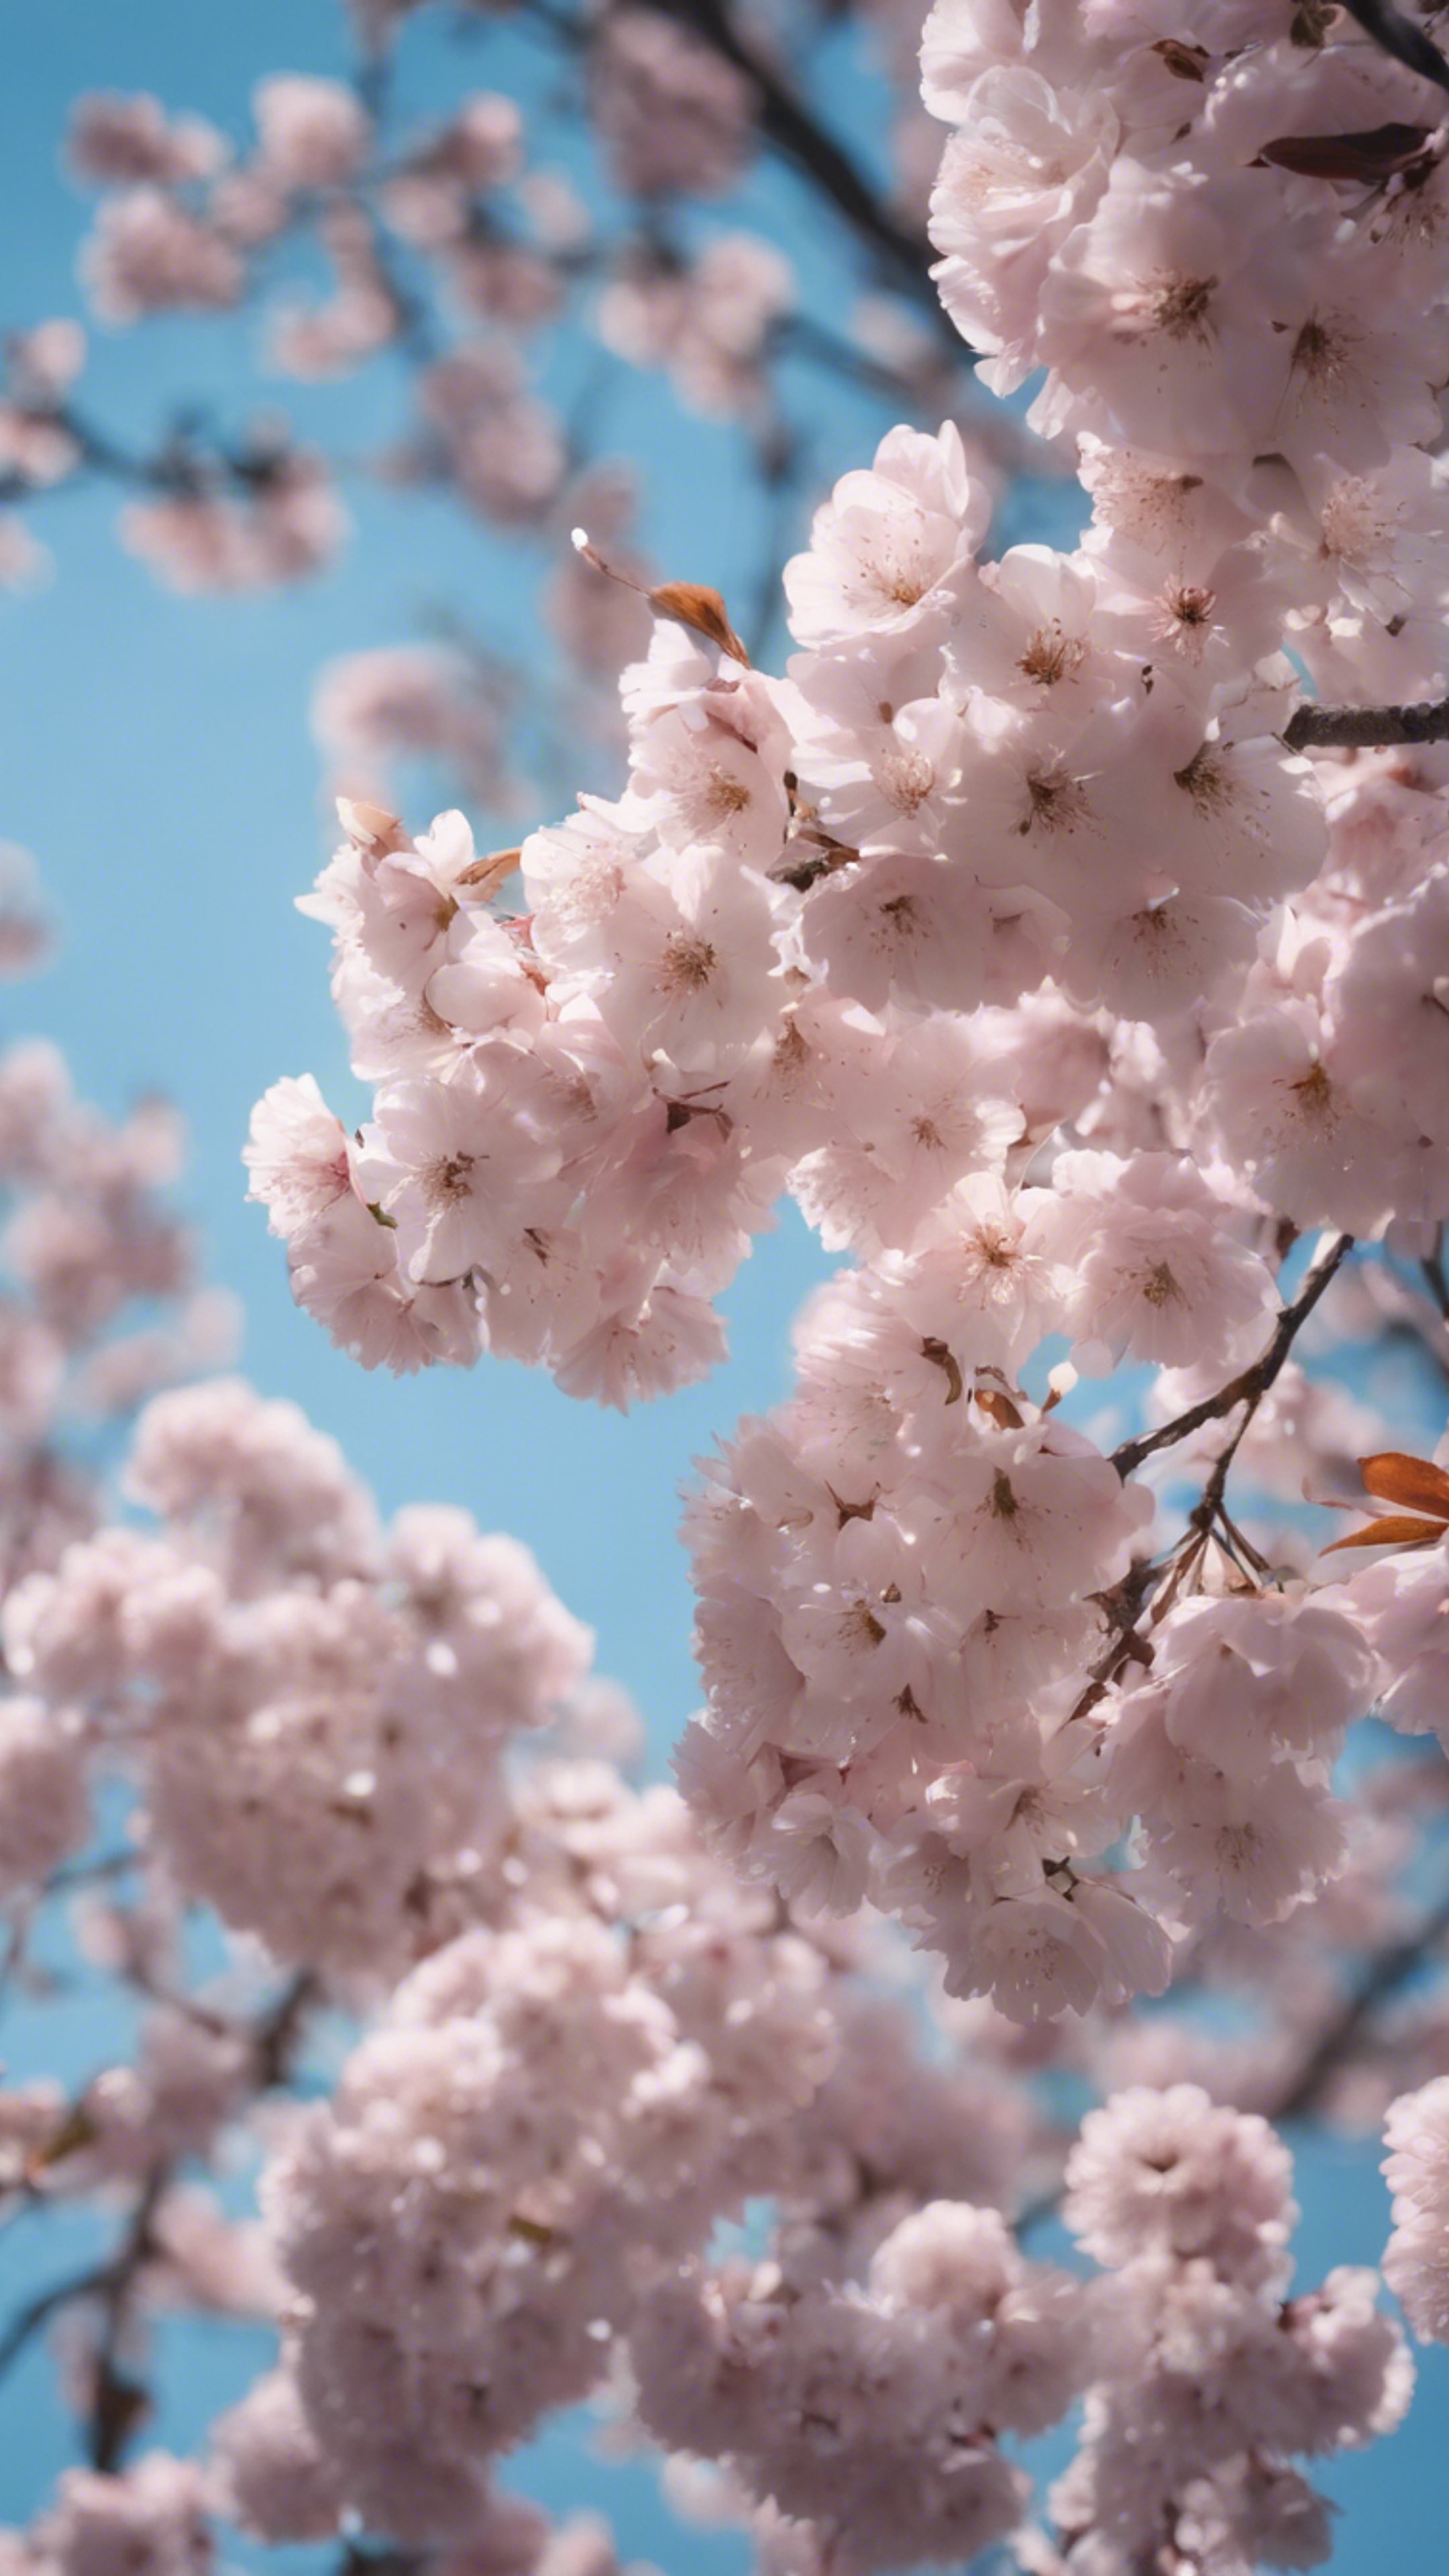 A Sakura tree in full bloom during springtime with a clear blue sky in the background. Wallpaper[fe771d7a91f341c490e6]